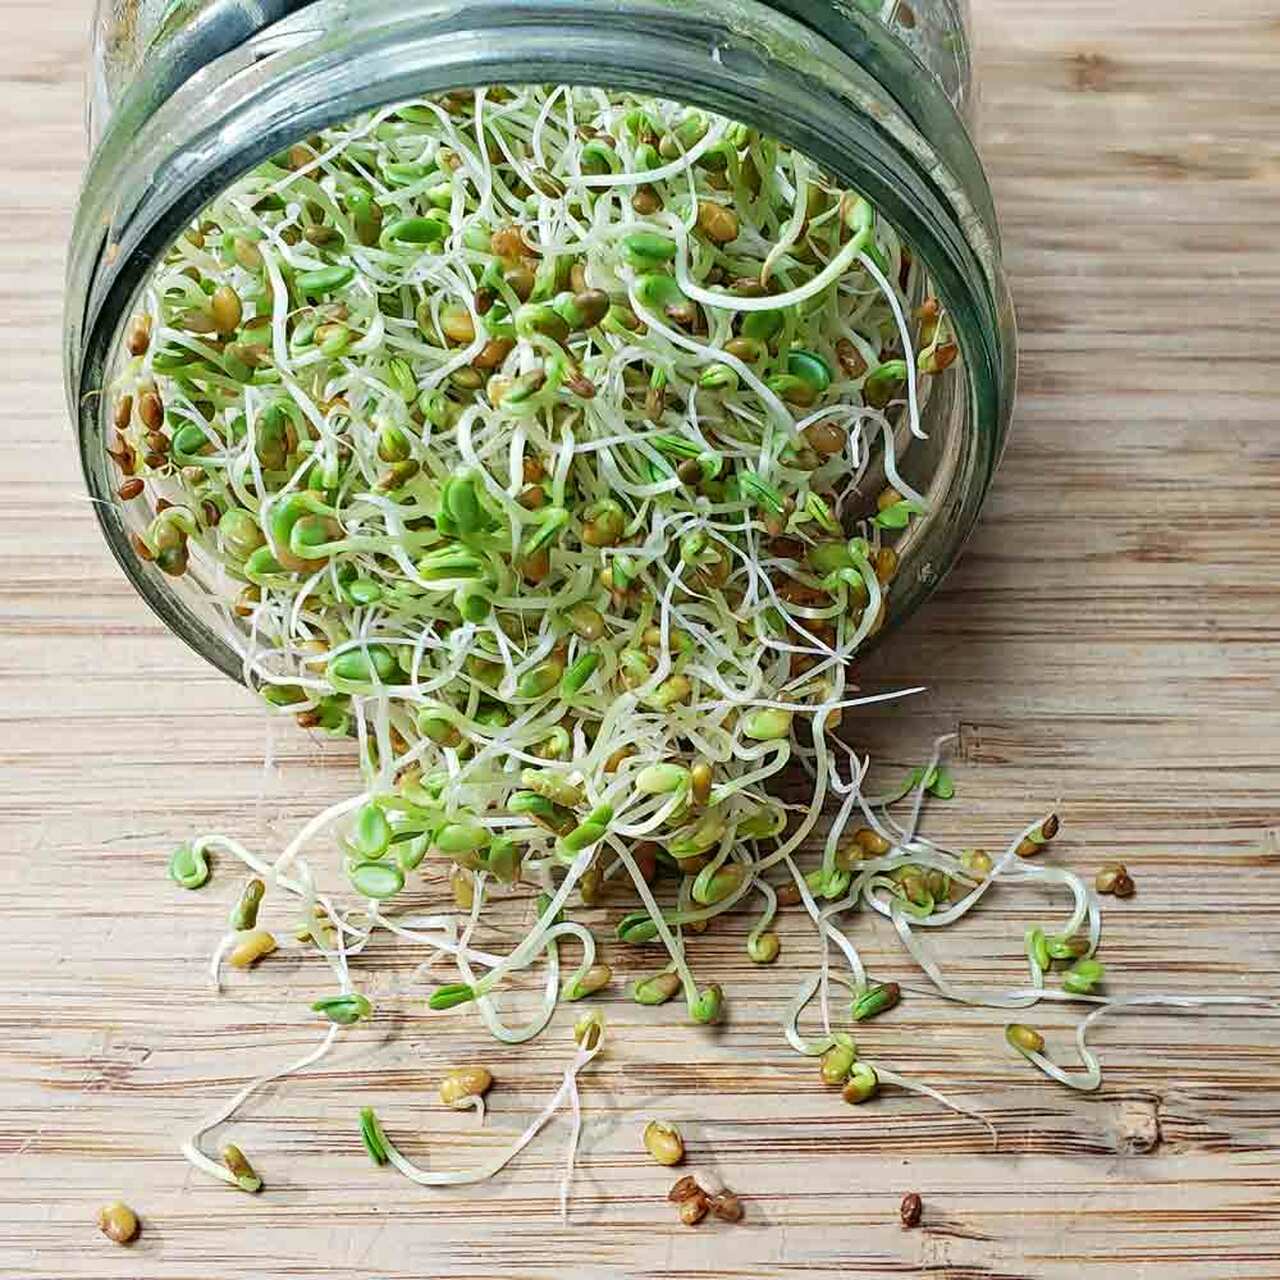 Crunchy Veggie Wraps with Organic Alfalfa Sprouts: A Crisp Bite of Health and Flavor